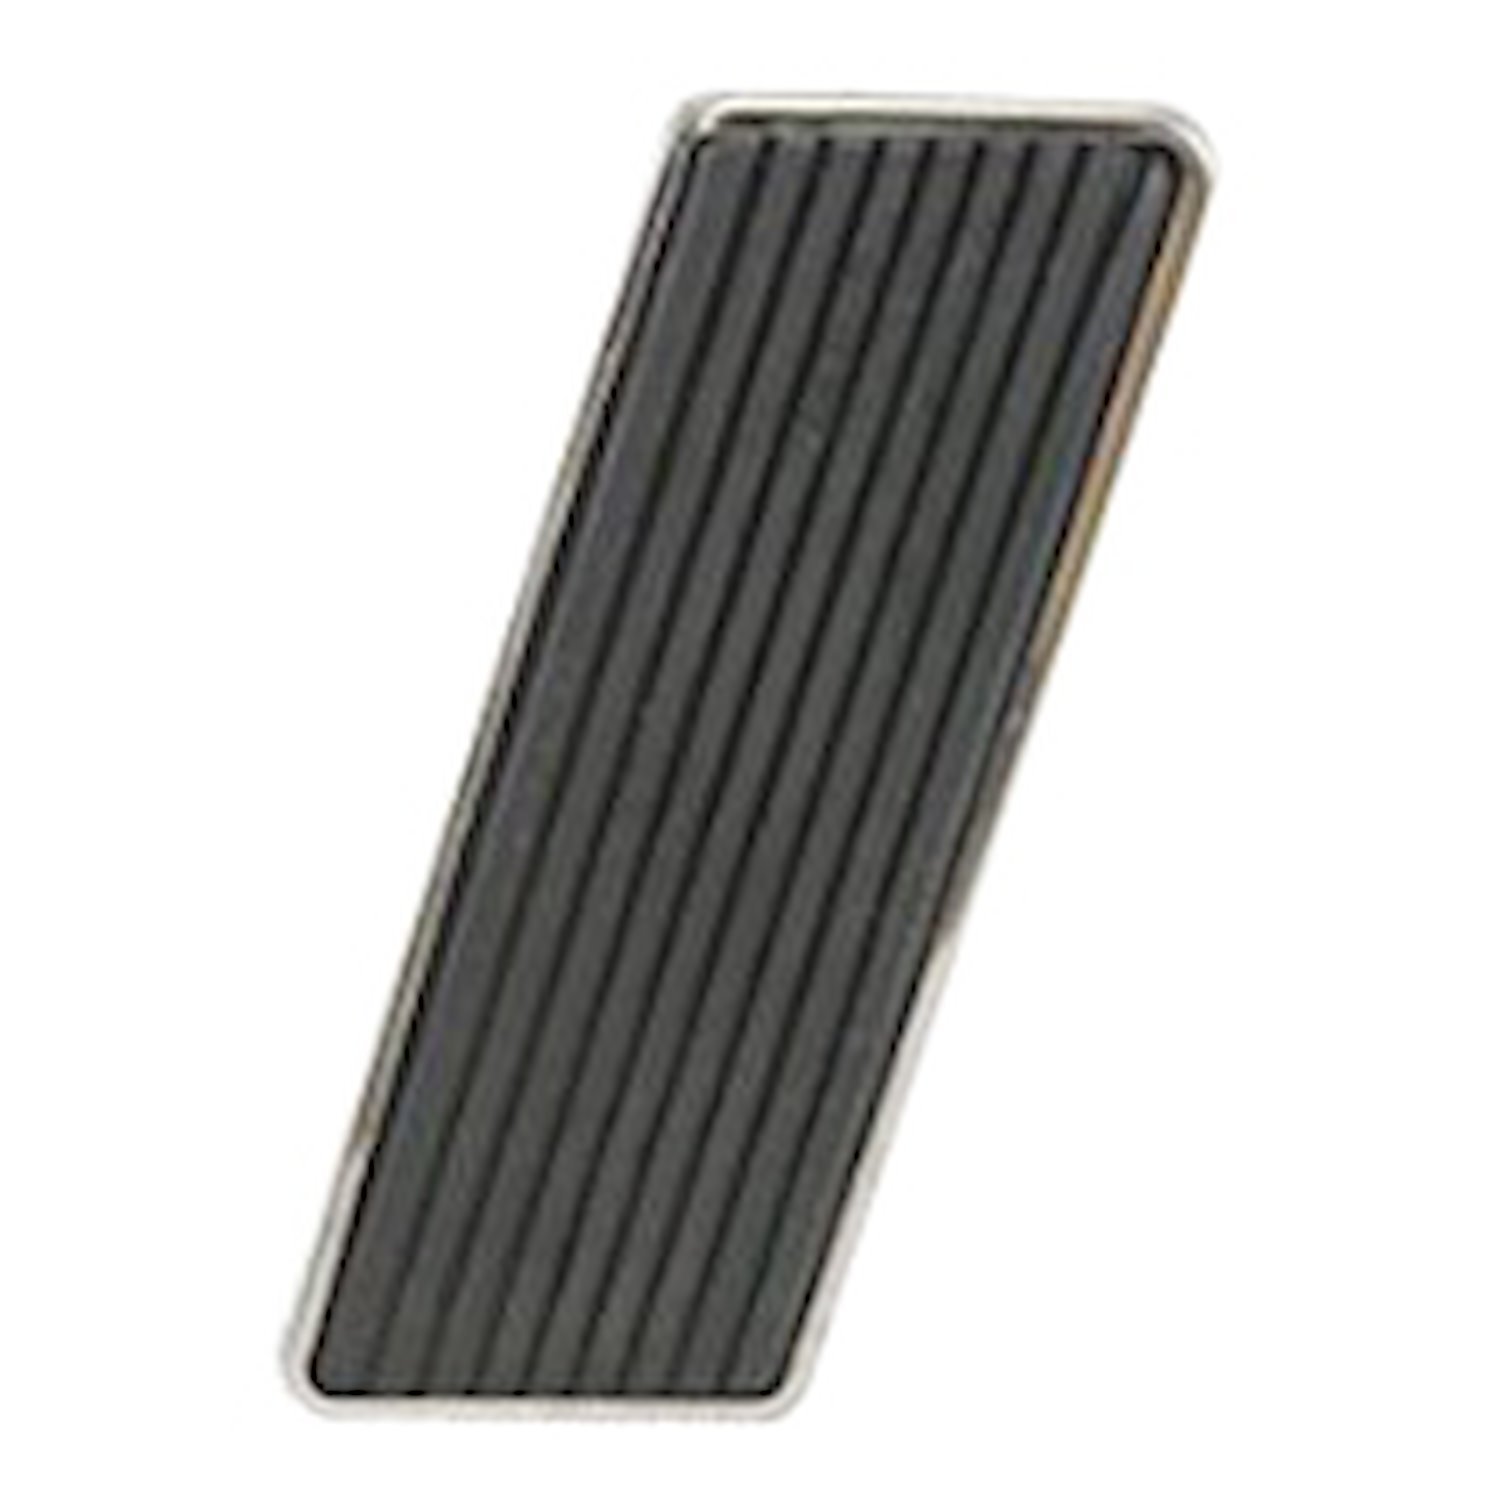 Accelerator Pedal with Trim 1964-1968 Ford Mustang